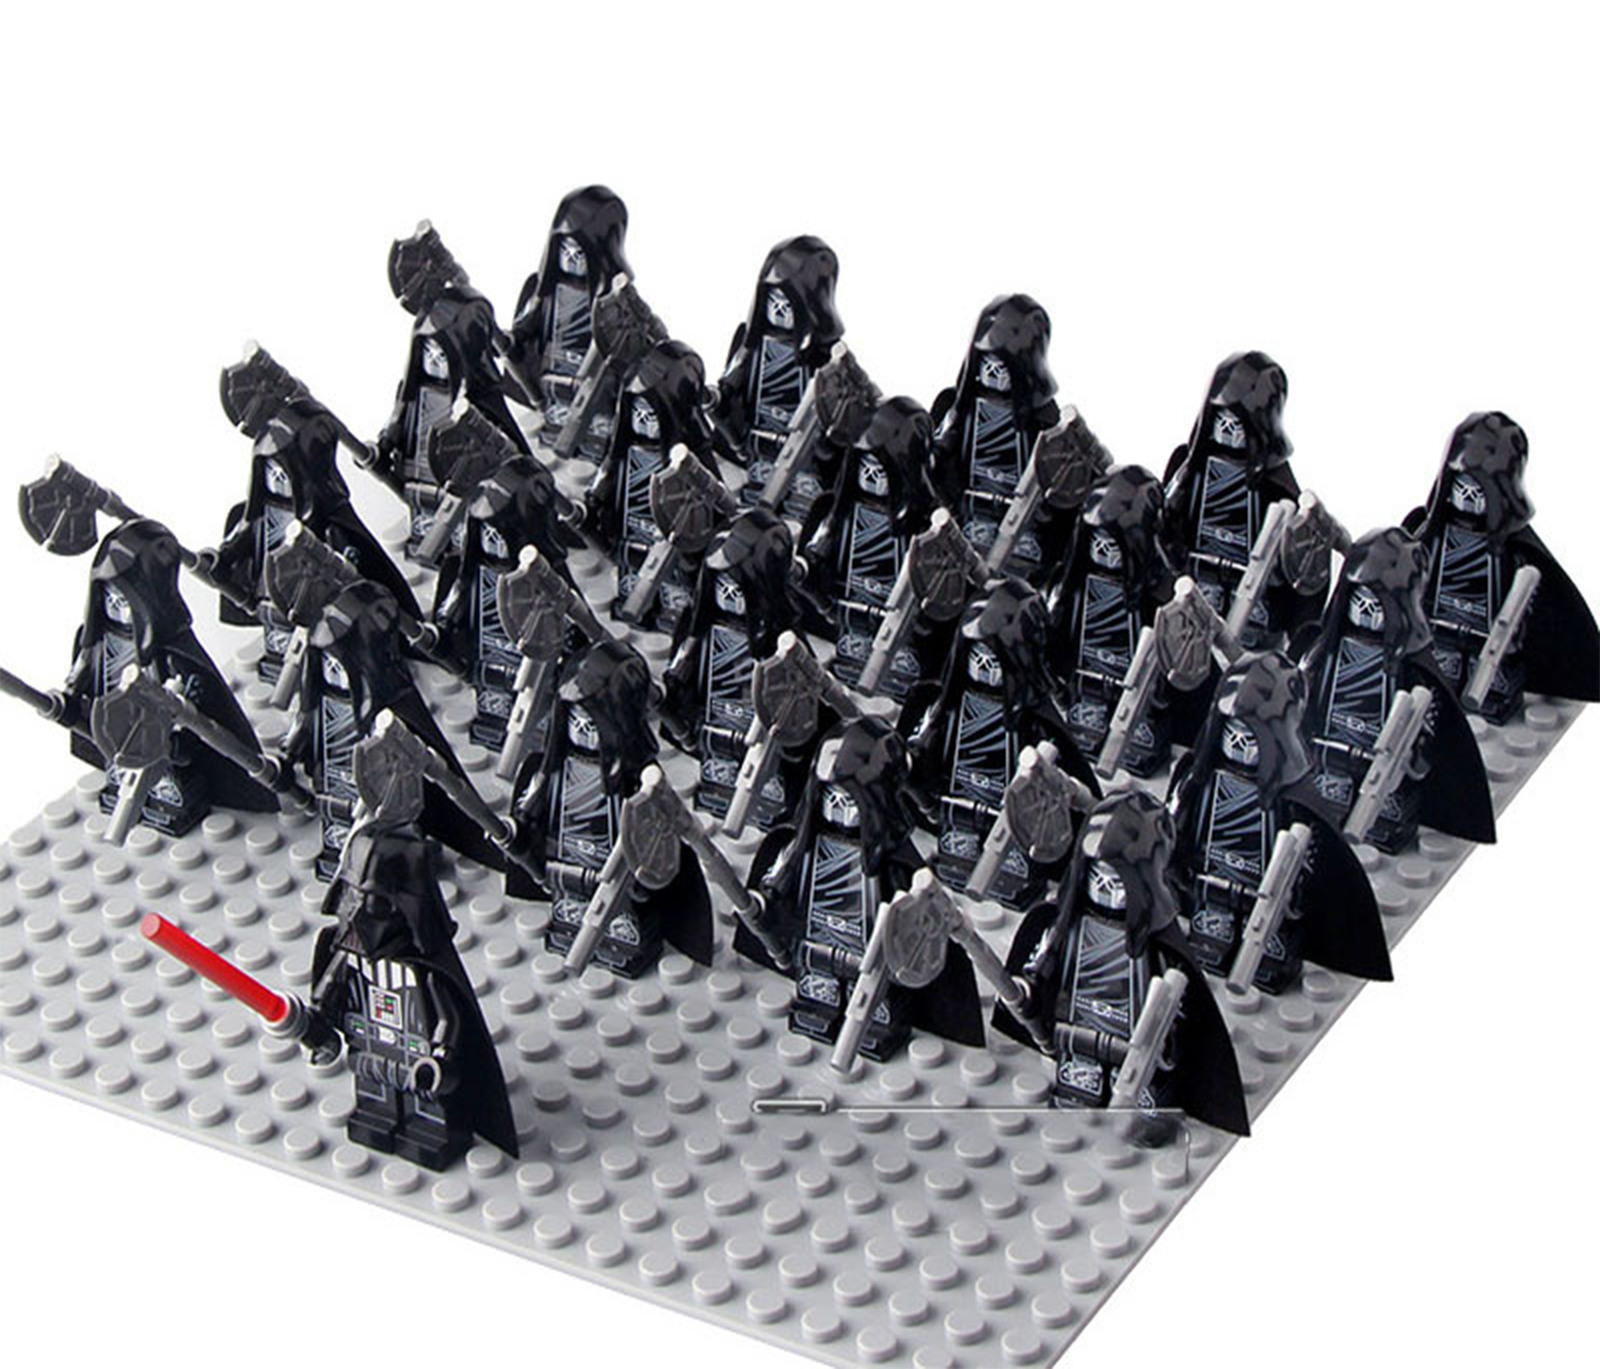 21pcs Custom Star Wars Minifigures Toys The Knights of Ren and Darth Vader